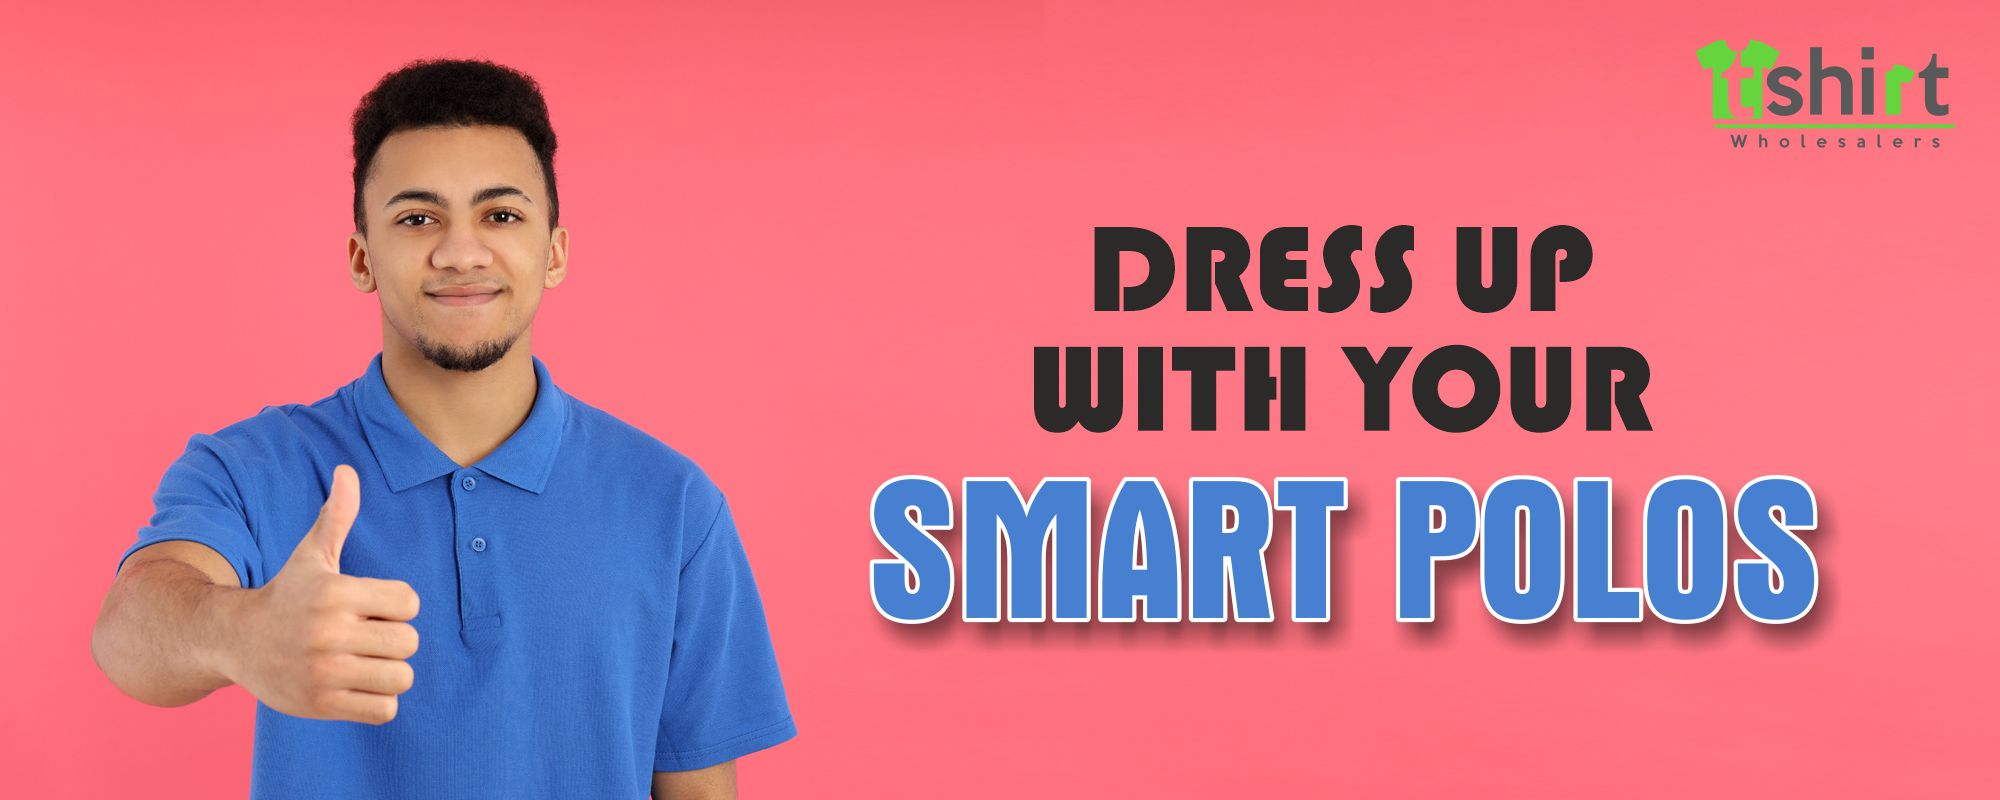 DRESS UP WITH YOUR SMART POLOS